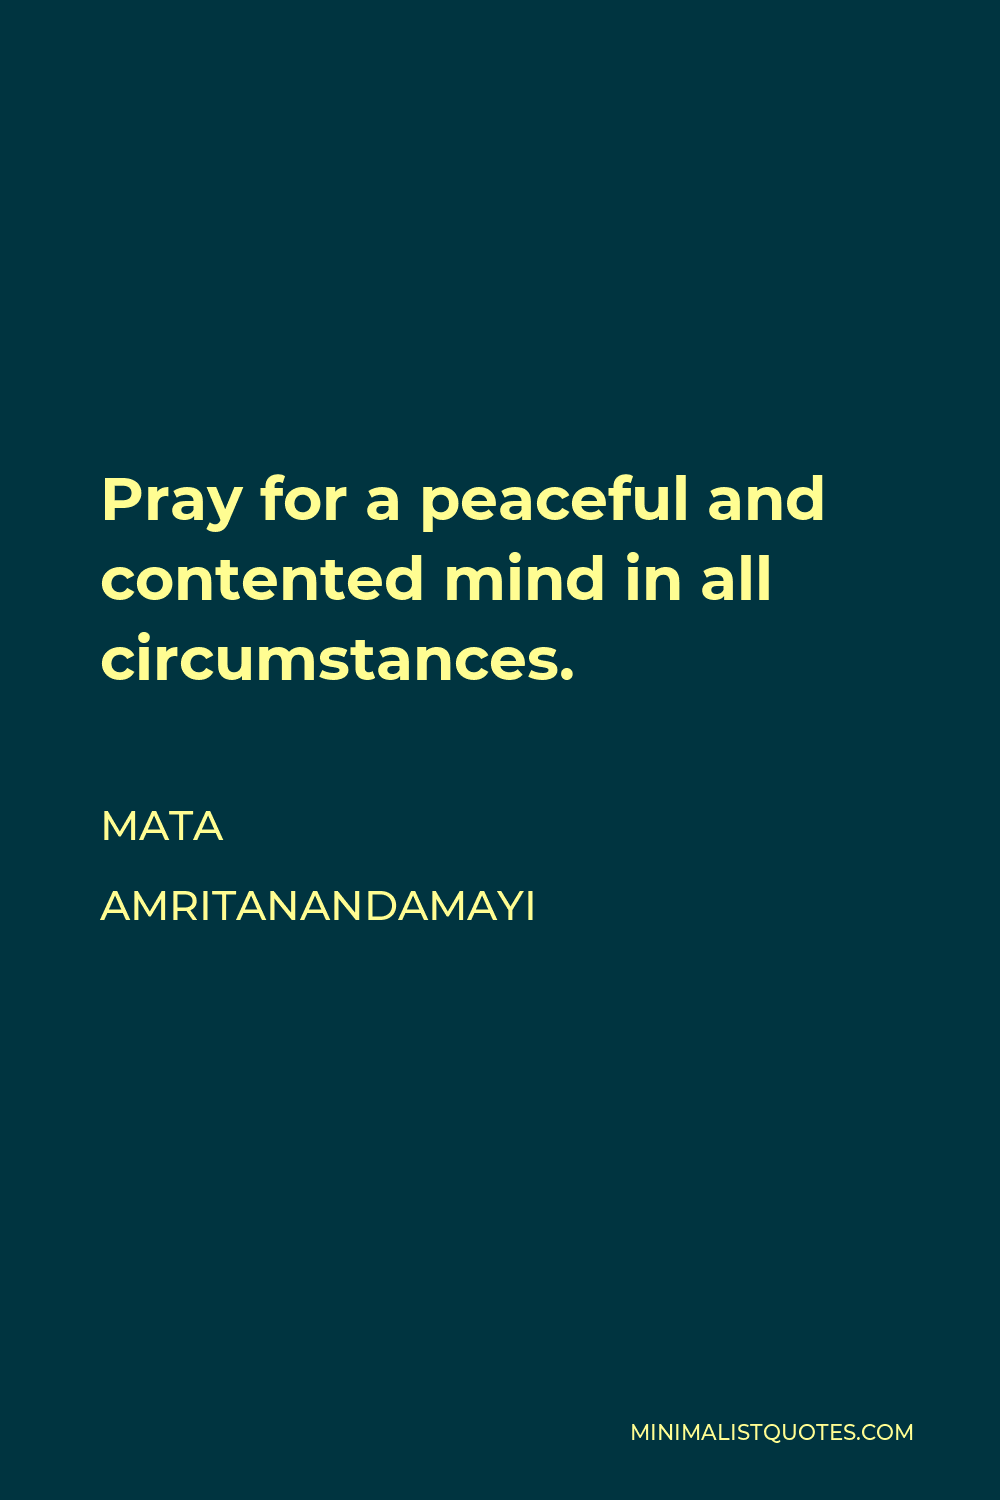 Mata Amritanandamayi Quote - Pray for a peaceful and contented mind in all circumstances.